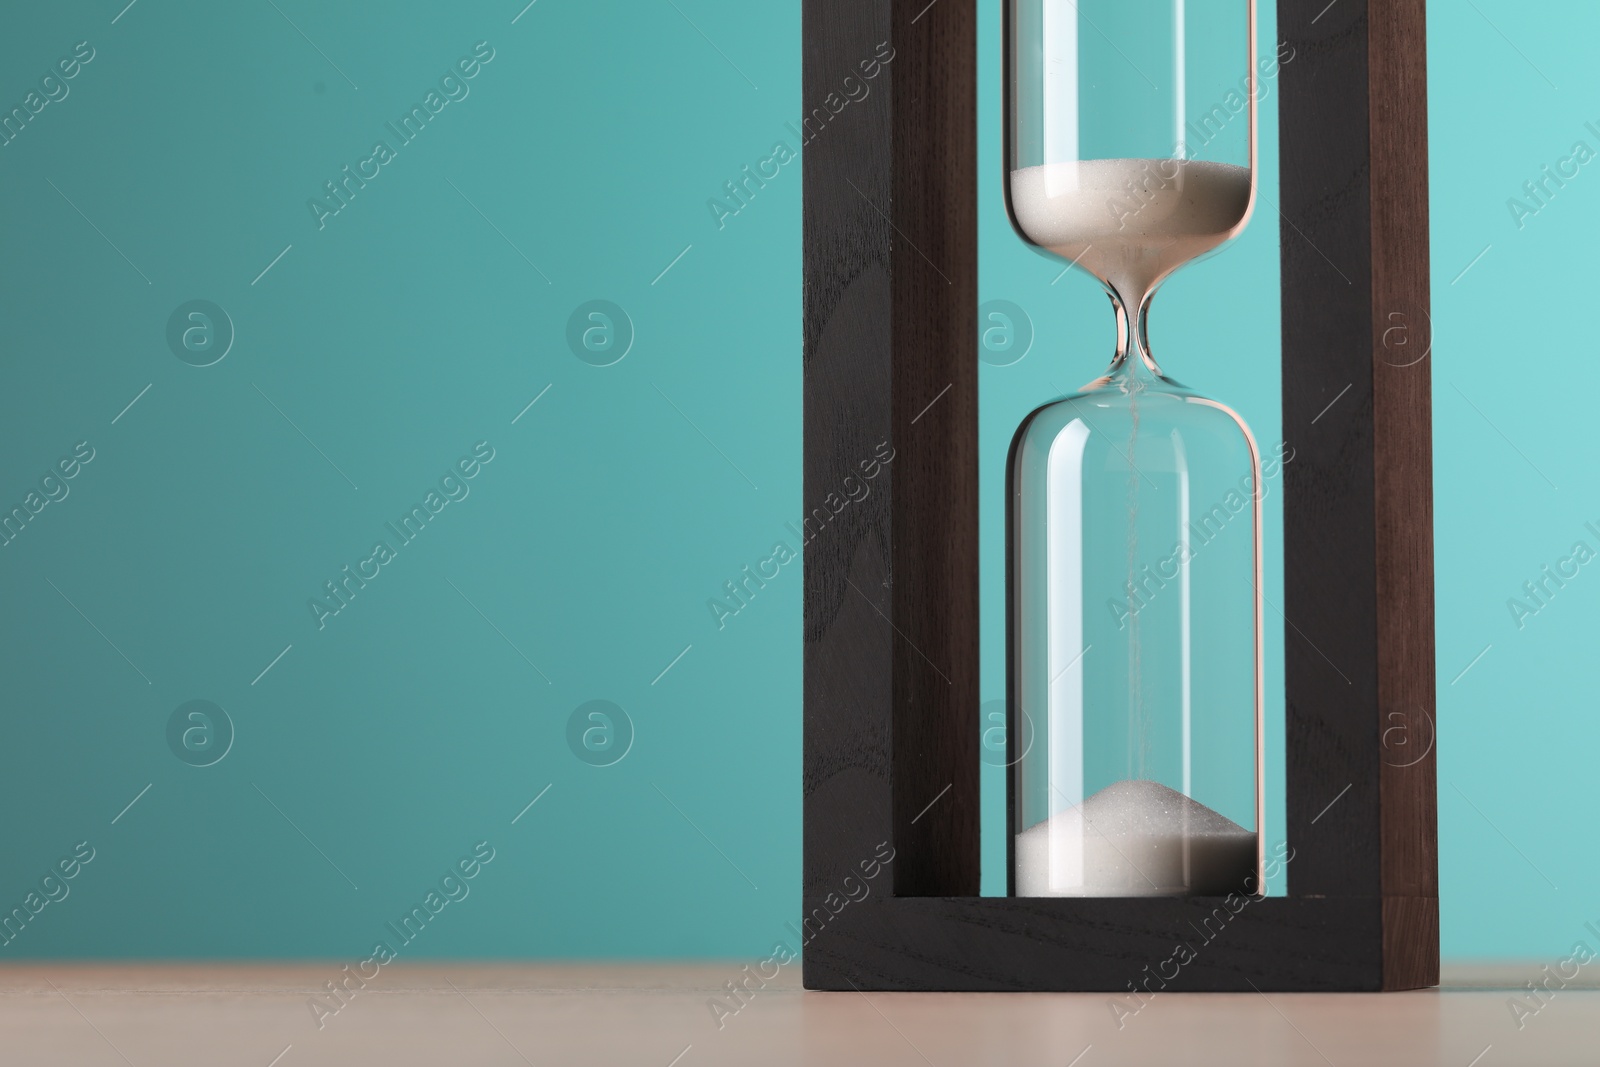 Photo of Hourglass with flowing sand on table against light blue background, space for text